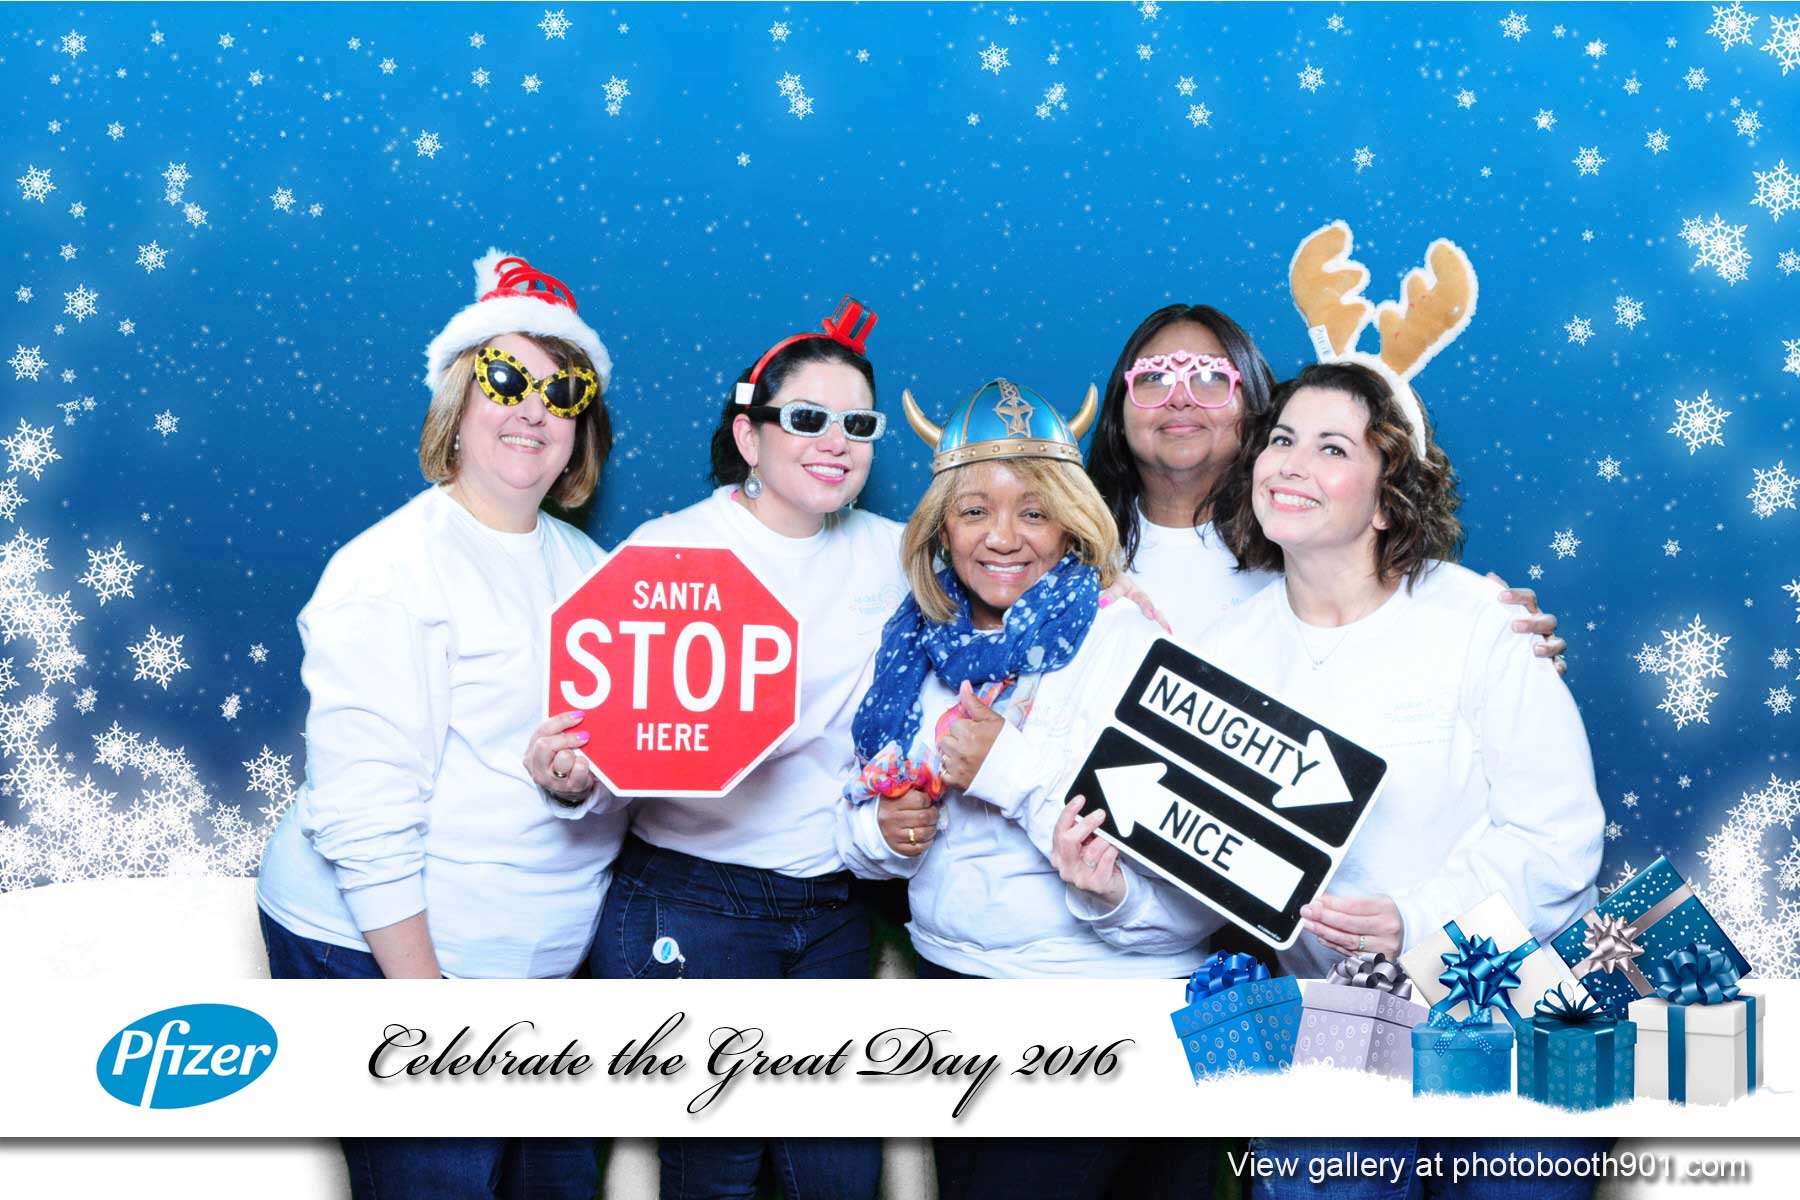 Photo booth at Pfizer Great Day Celebration